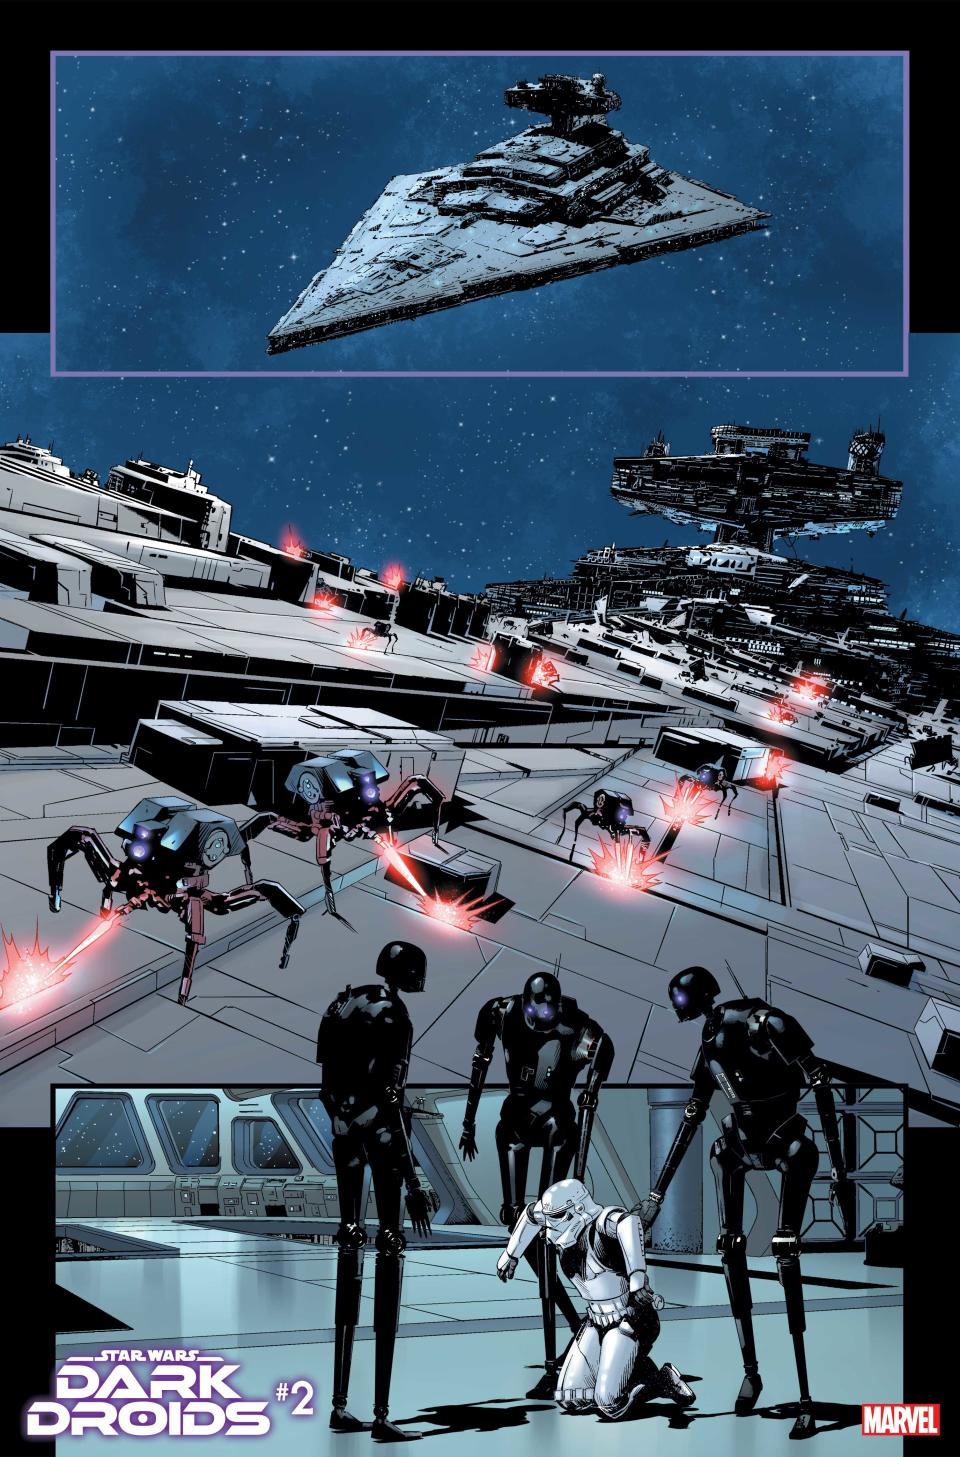 Pages from Star Wars: Dark Droids #2.